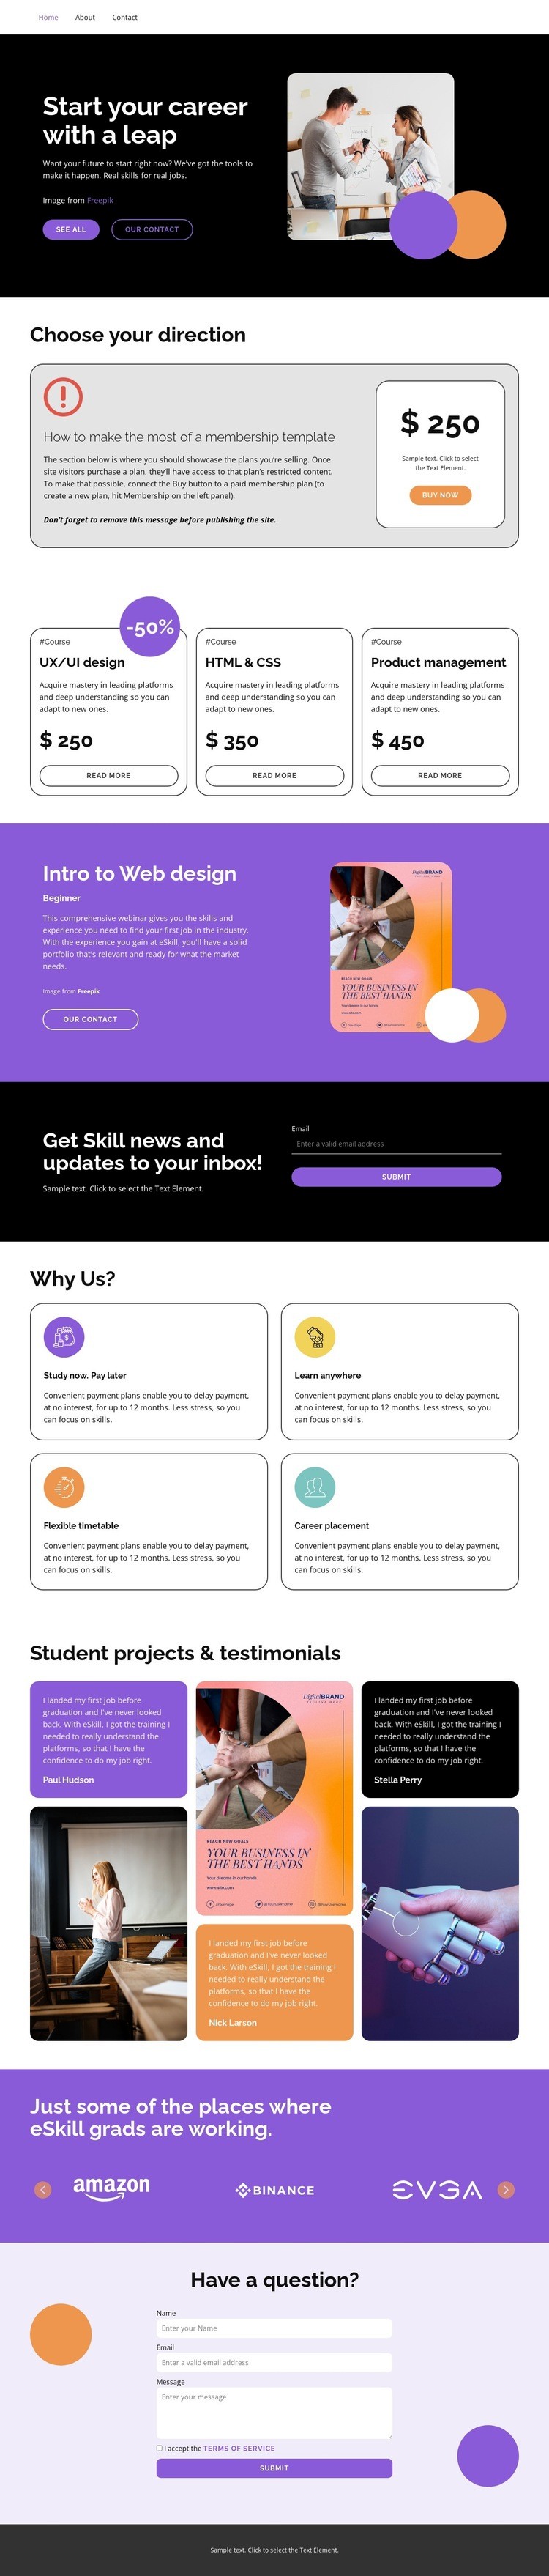 High-quality courses Homepage Design